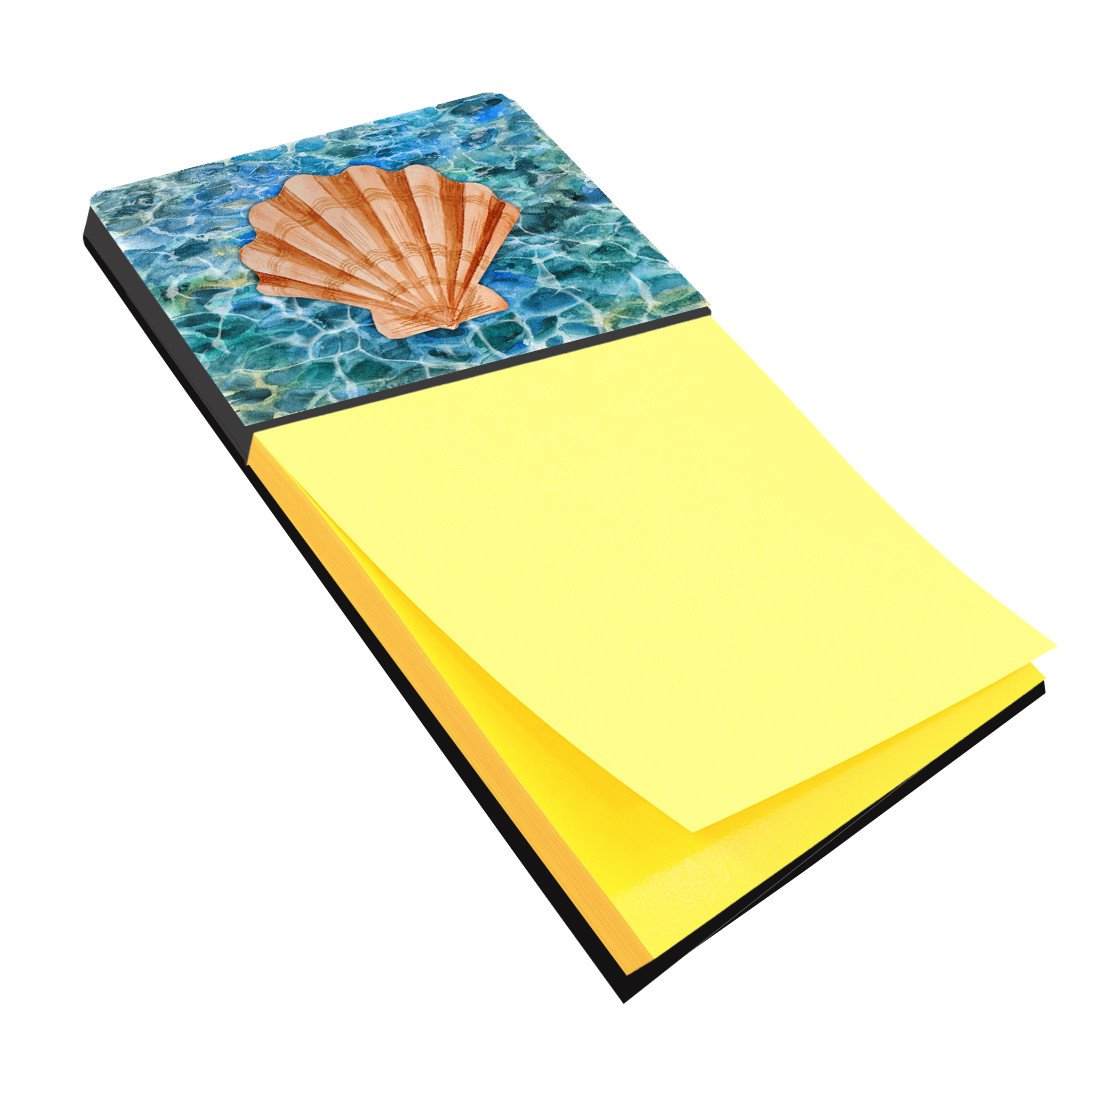 Scallop Shell and Water Sticky Note Holder BB5367SN by Caroline's Treasures